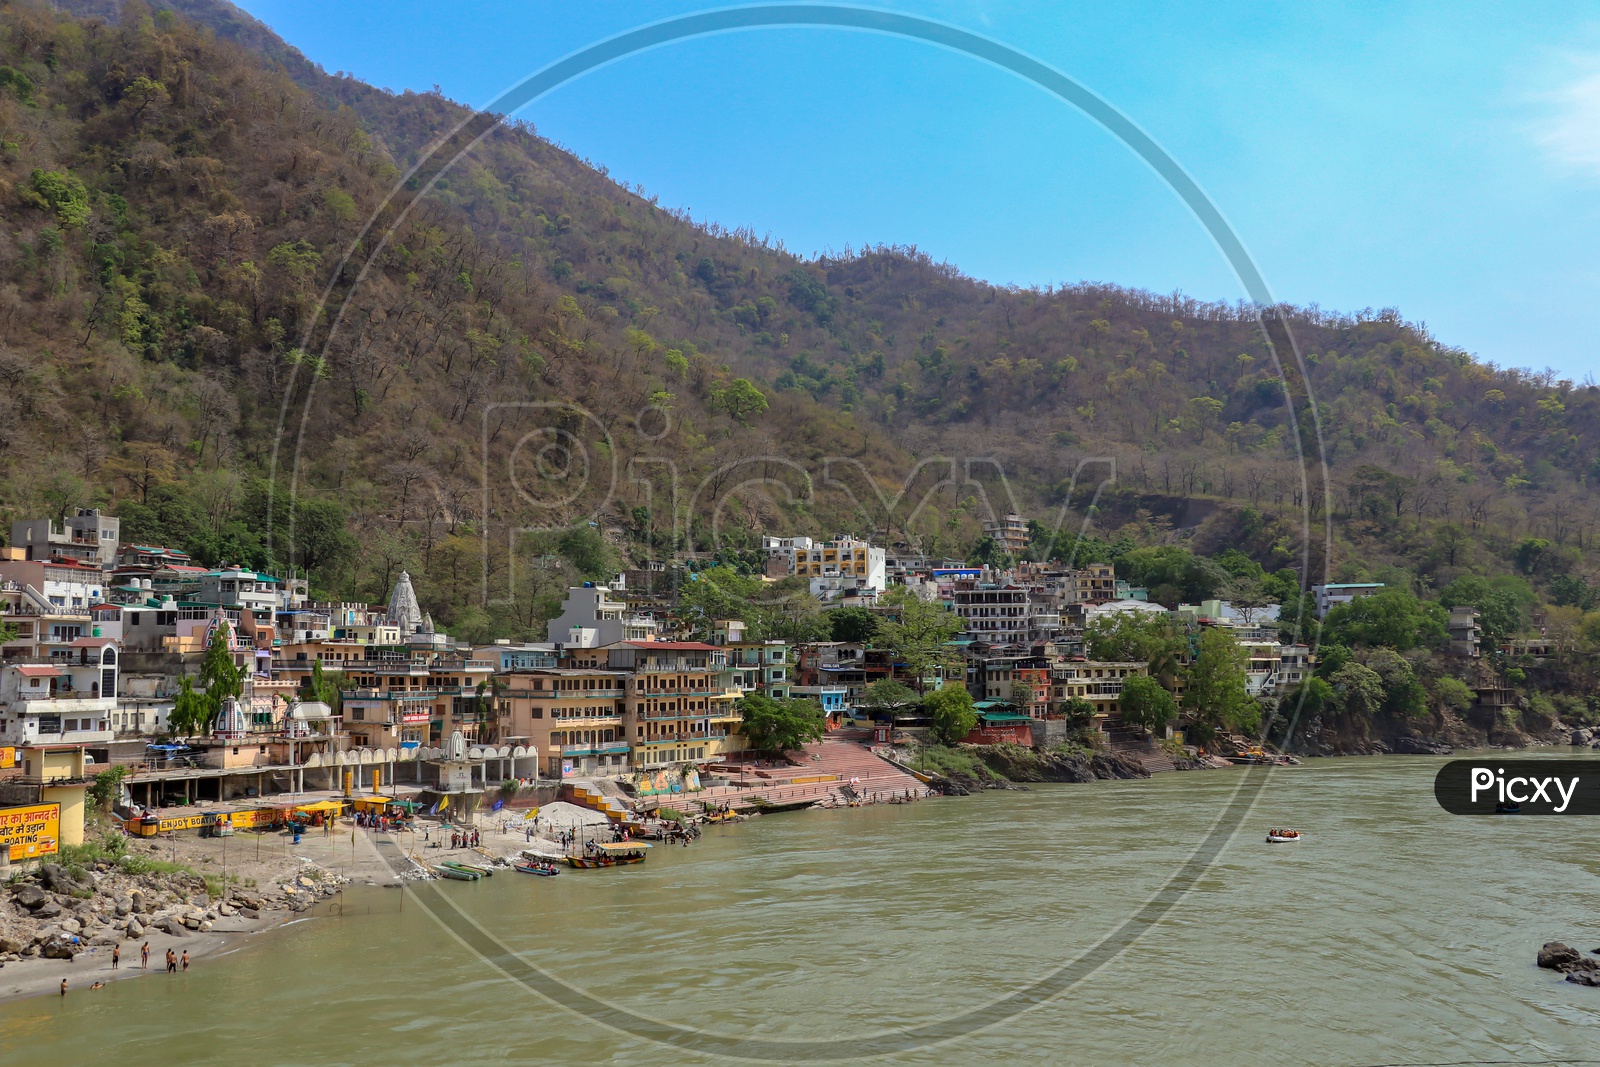 Hindu temples and buildings on the banks of River Ganges